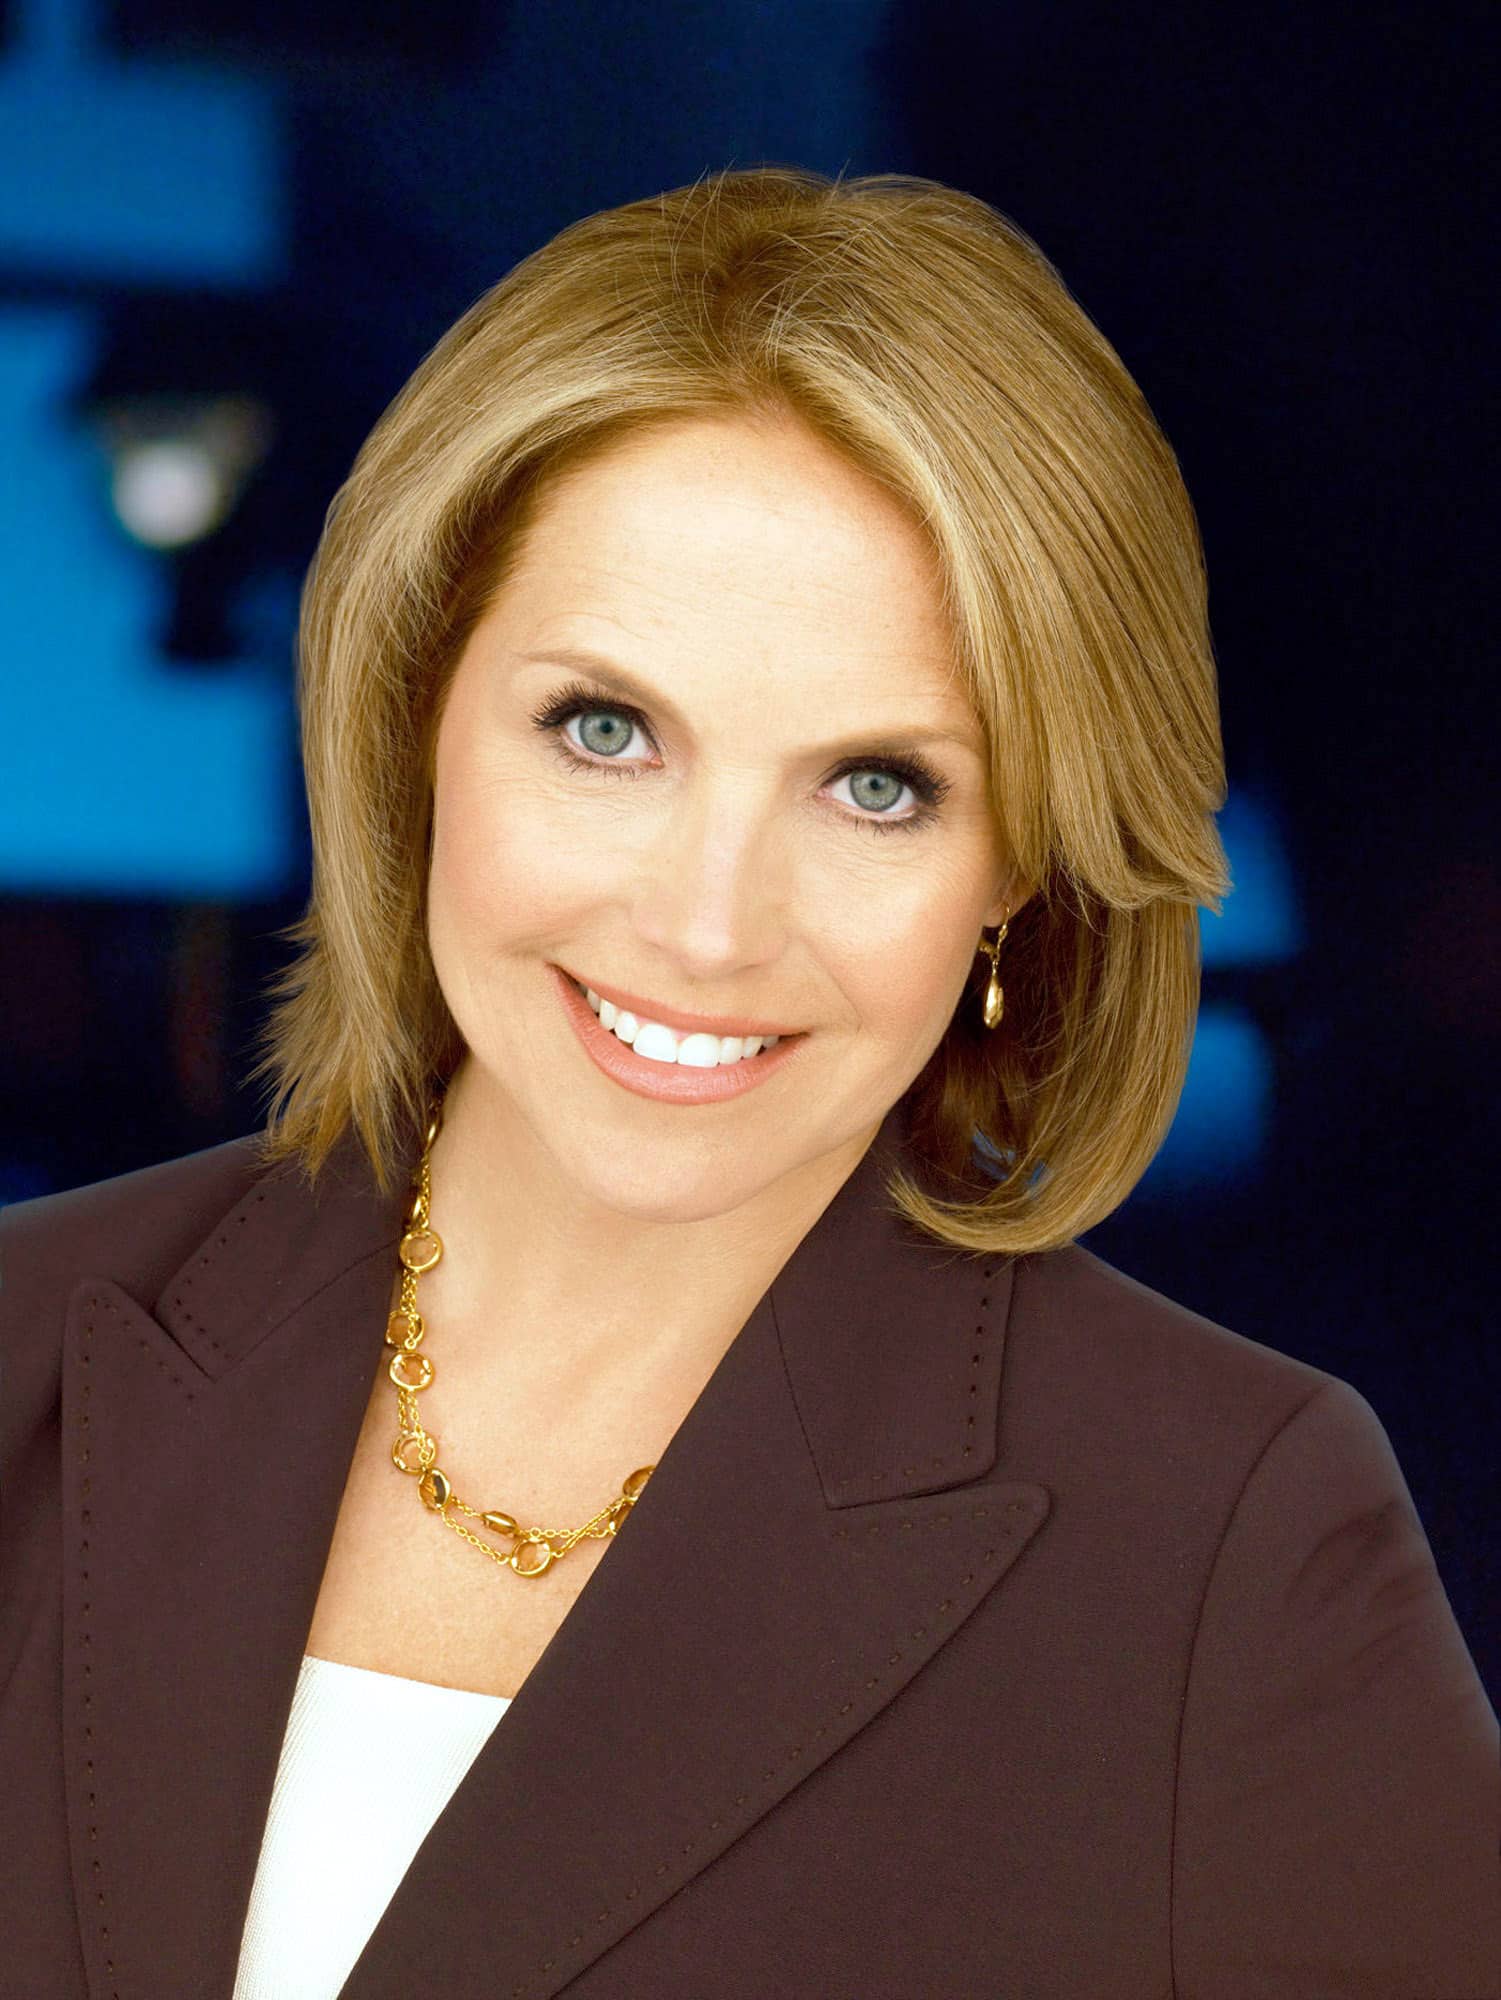 CBS EVENING NEWS WITH KATIE COURIC, Katie Couric, (2006), 2006-11